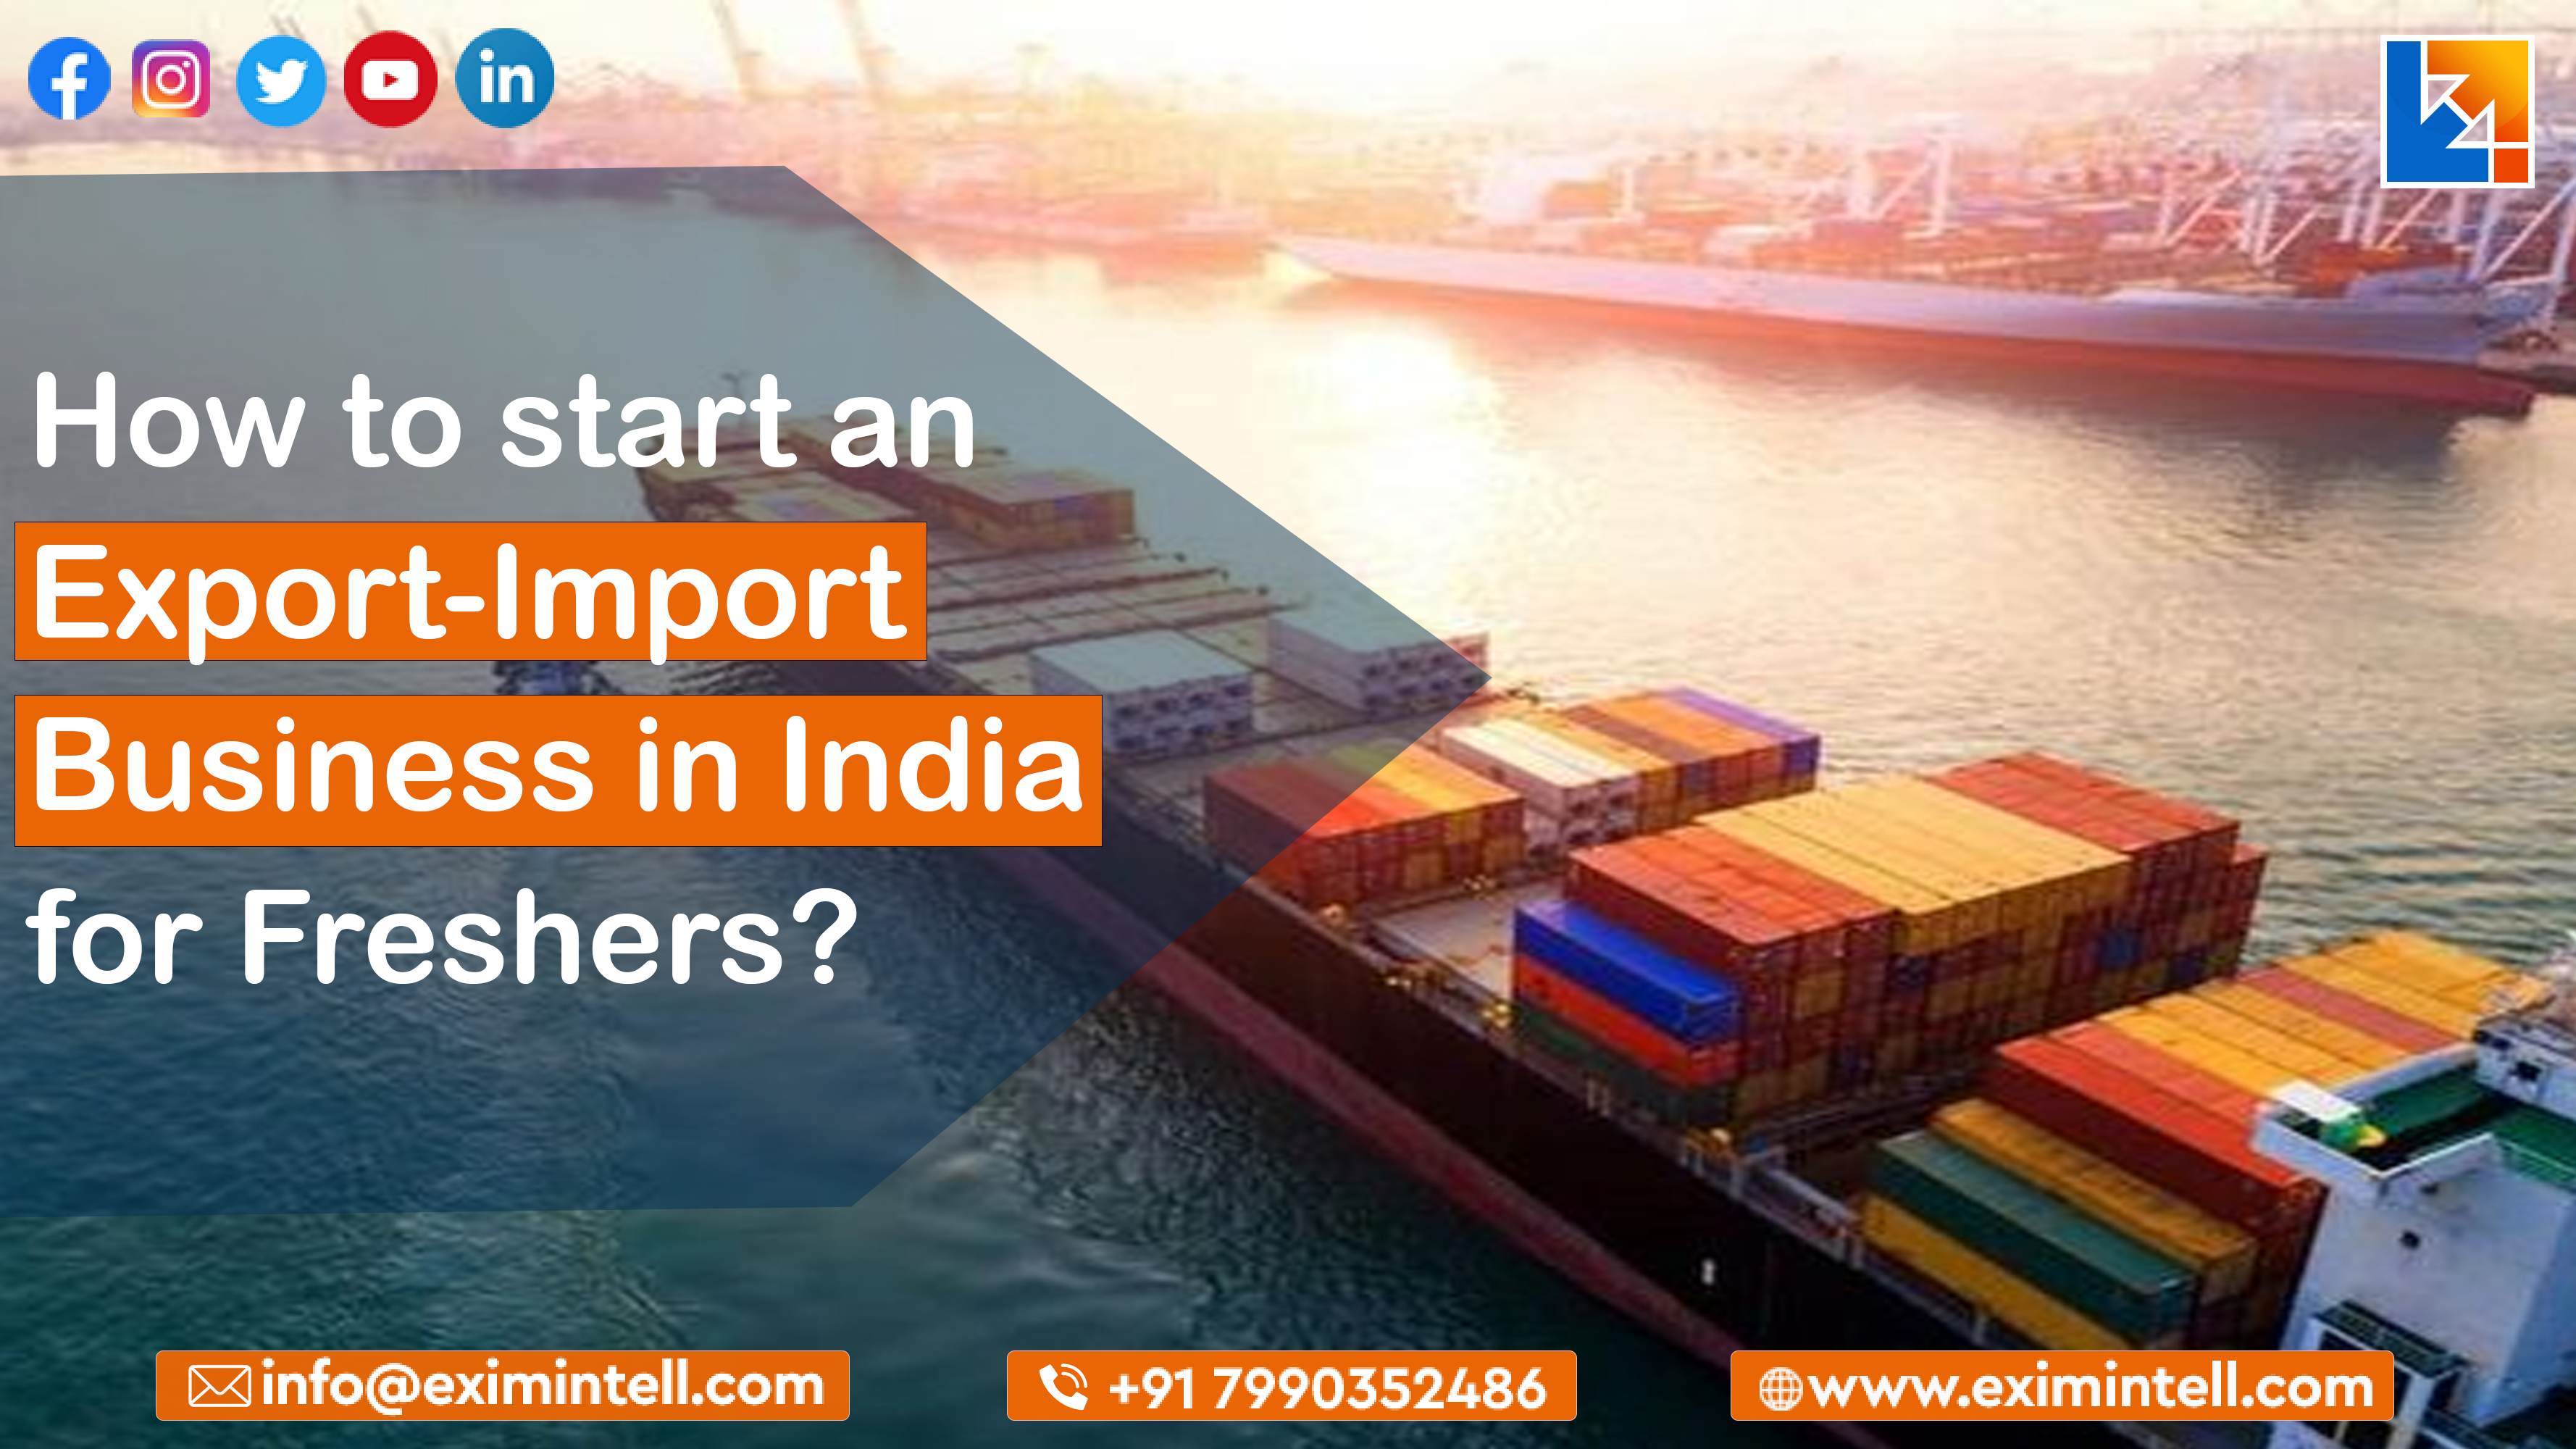 How to Start an Export-Import Business in India for Freshers?